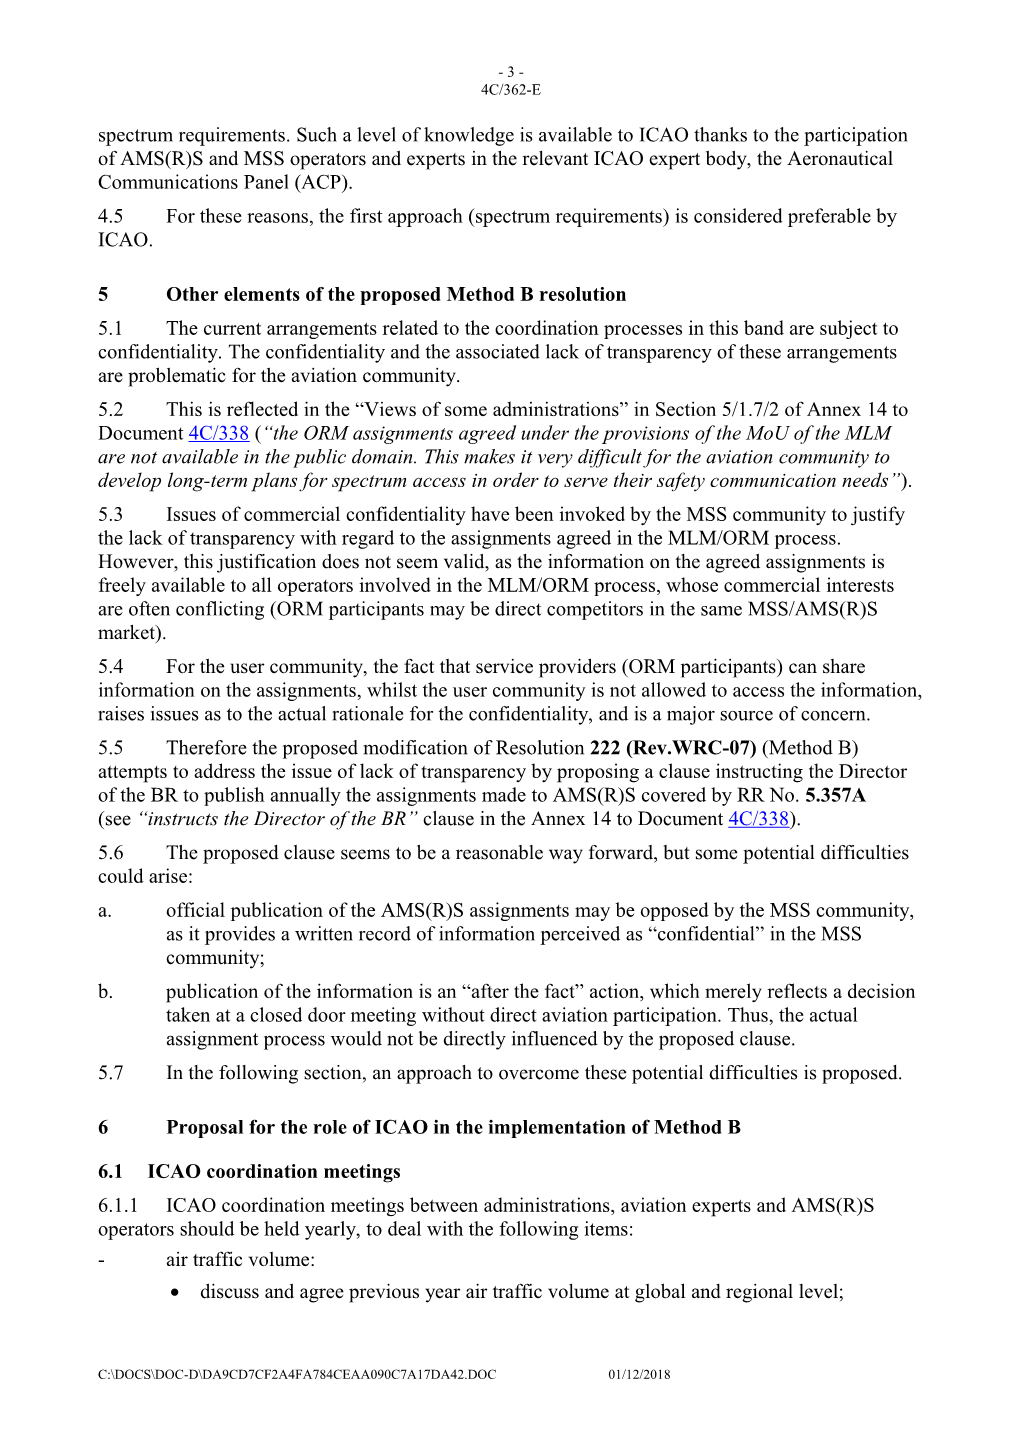 Potential Role of Icao in the Coordination of Ams(R)S Spectrum Requirements Under Resolution